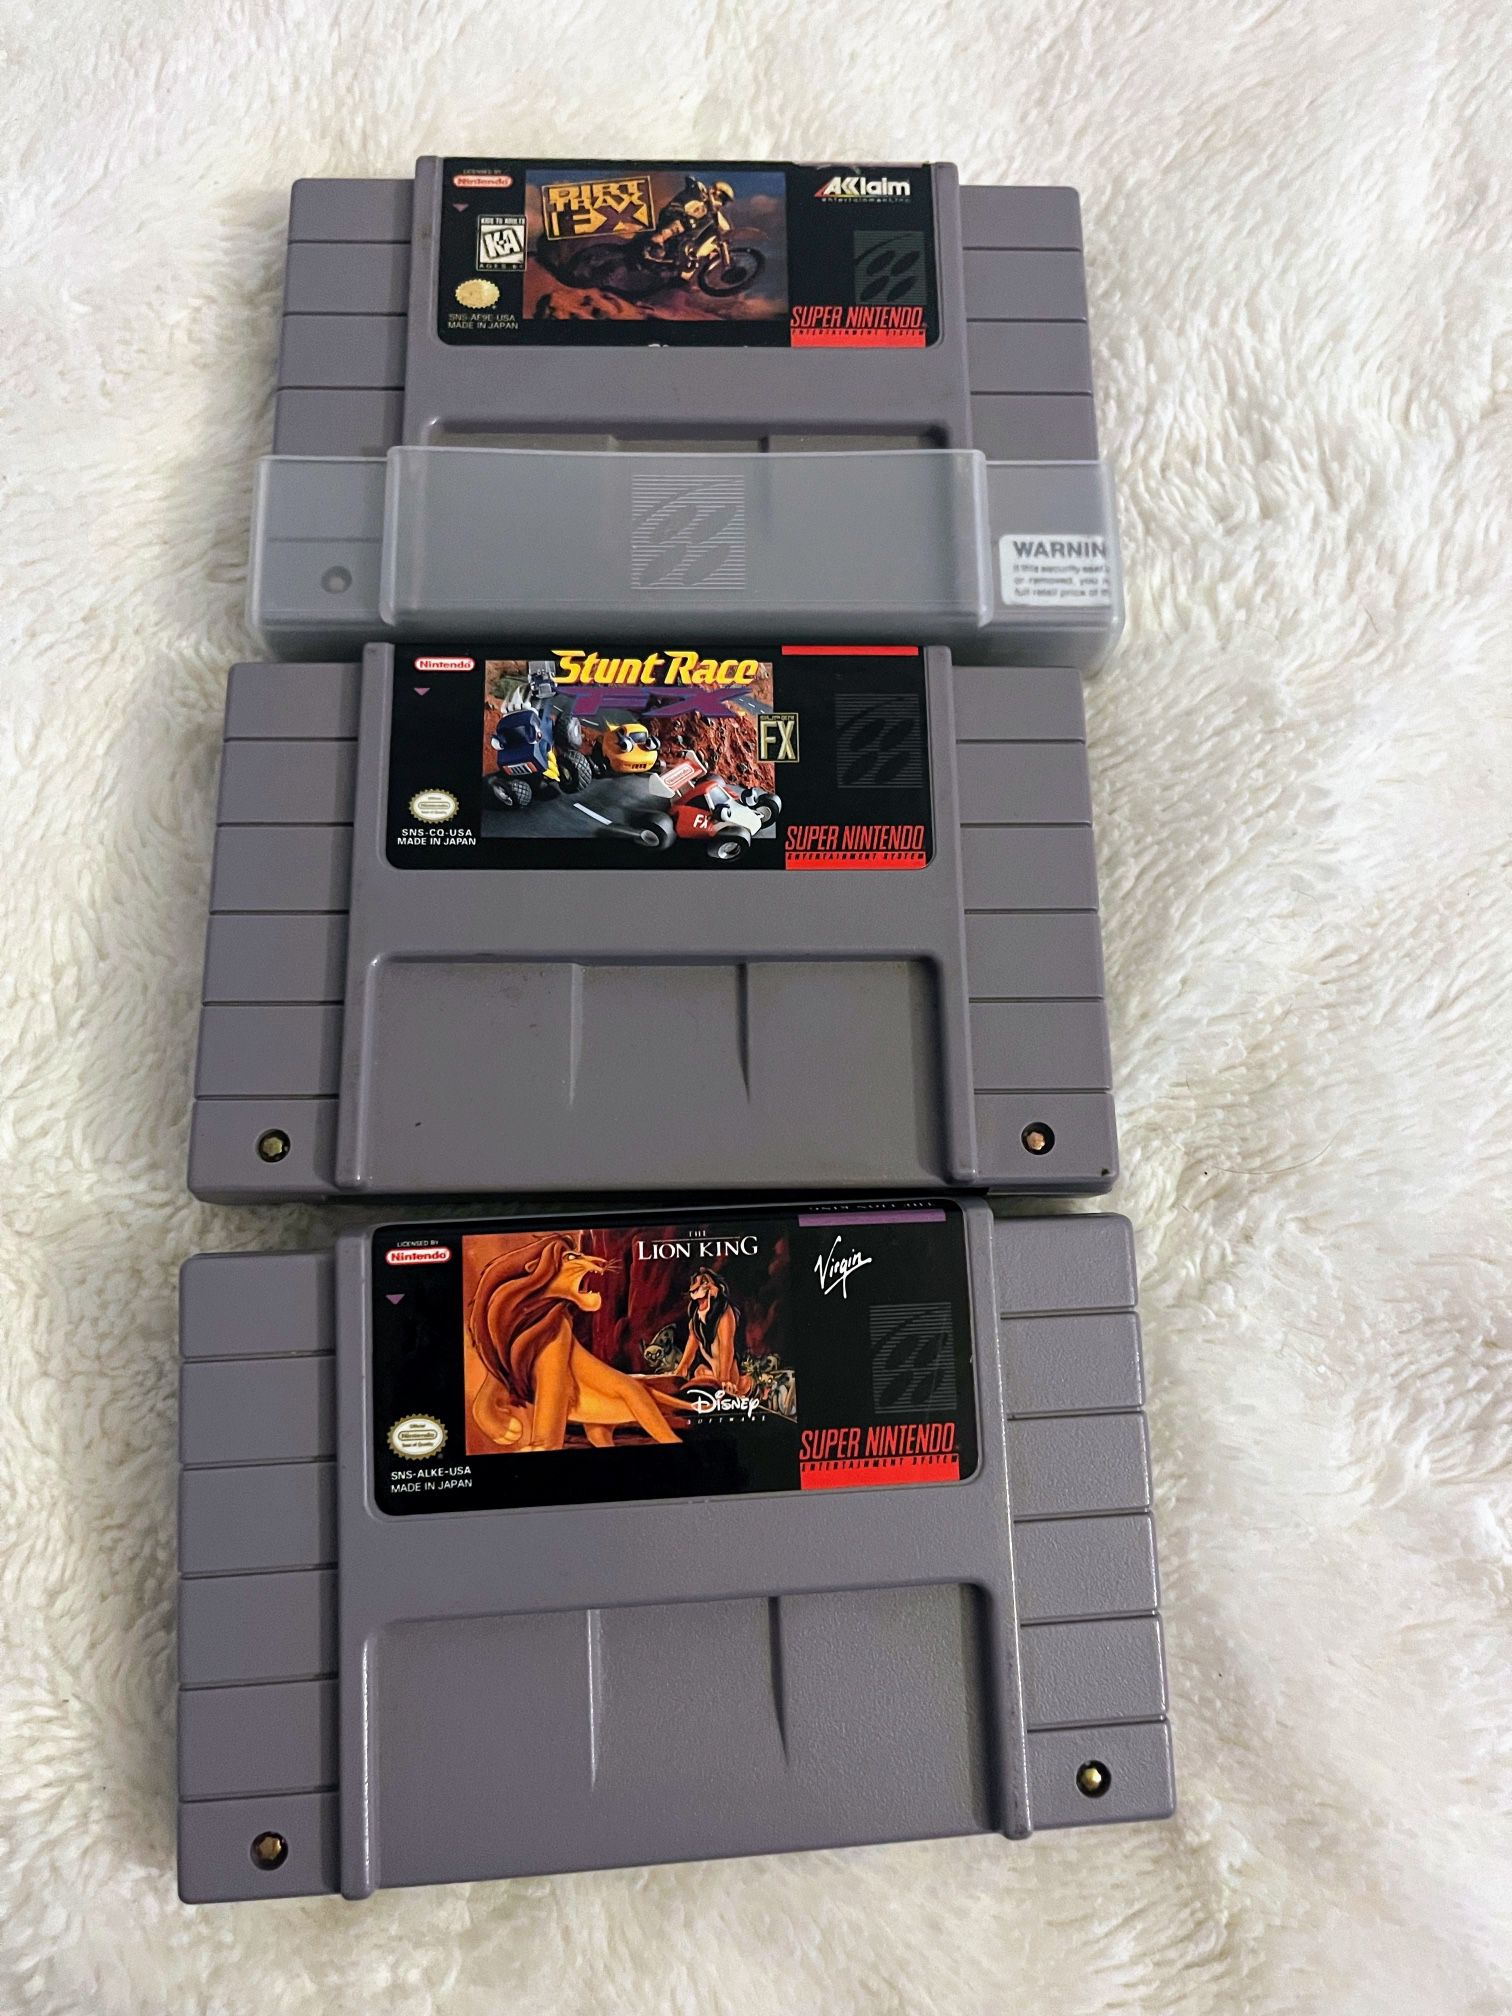 SNES games prices vary